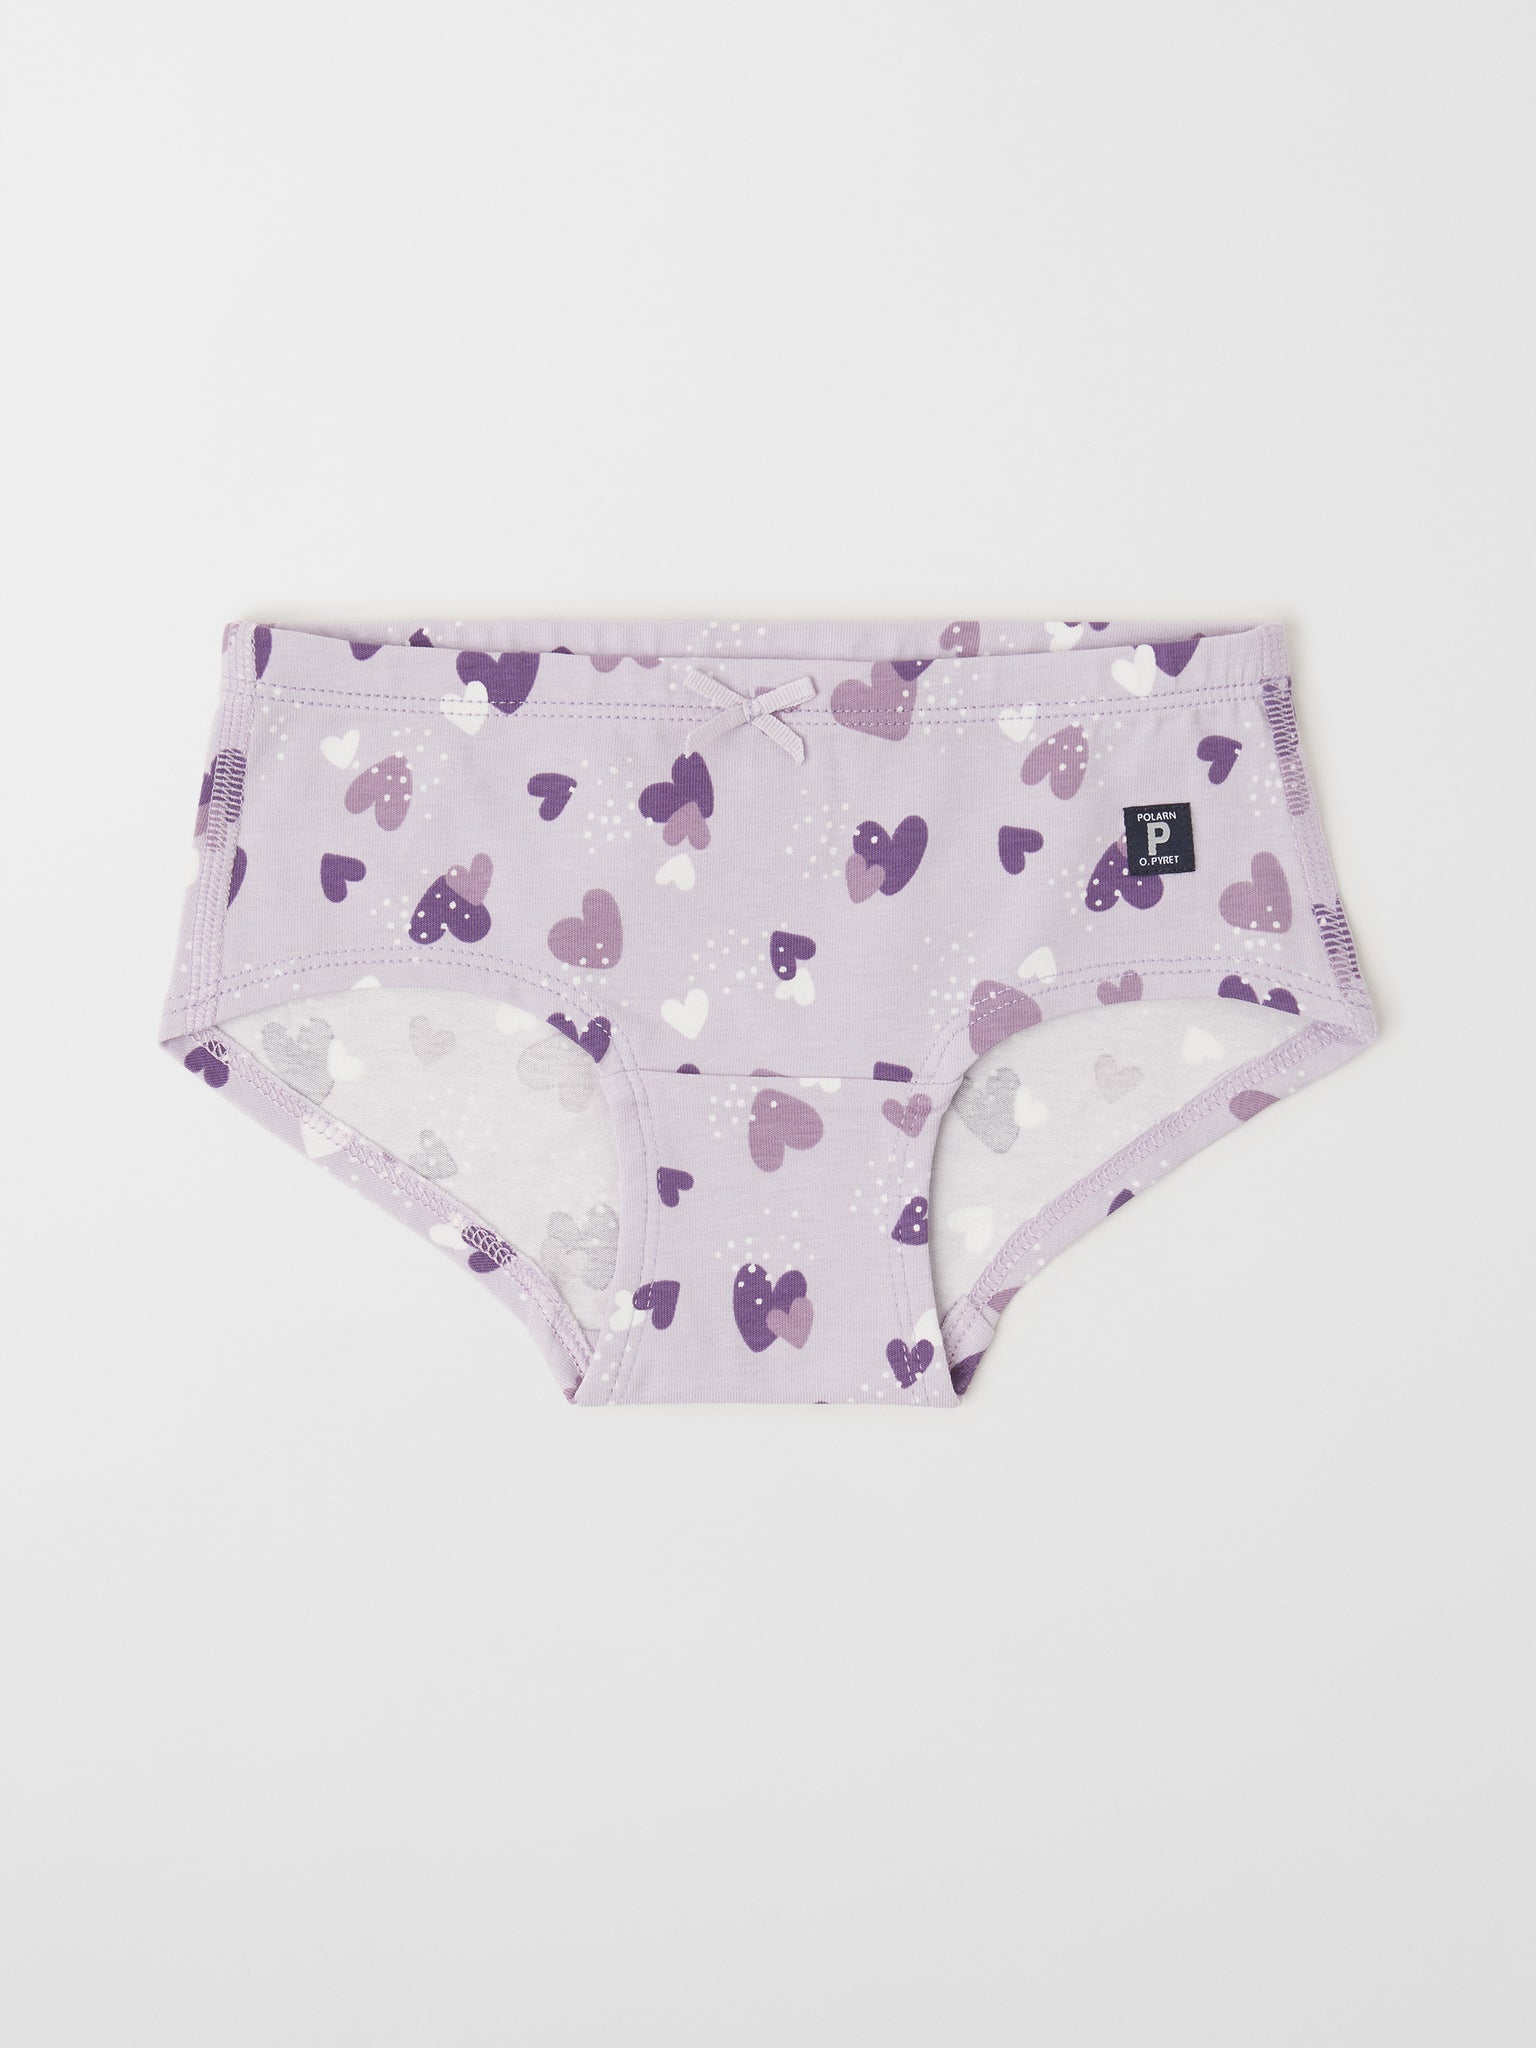 Organic Cotton Girls Hipster Briefs from the Polarn O. Pyret kidswear collection. Nordic kids clothes made from sustainable sources.